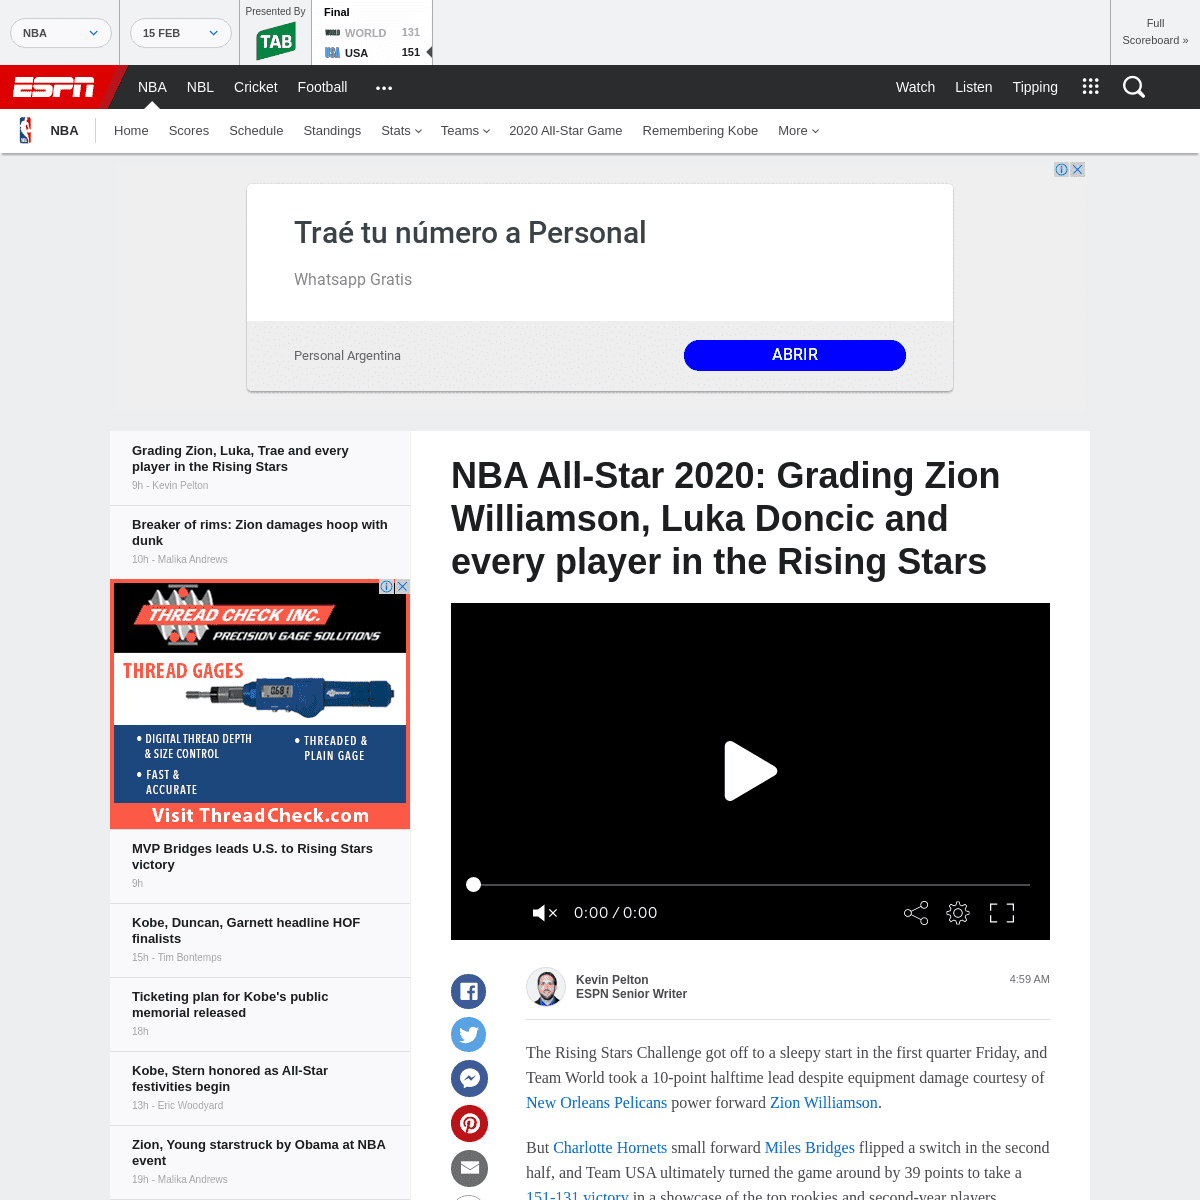 A complete backup of www.espn.com.au/nba/story/_/id/28693666/nba-all-star-2020-grading-zion-williamson-luka-doncic-every-player-